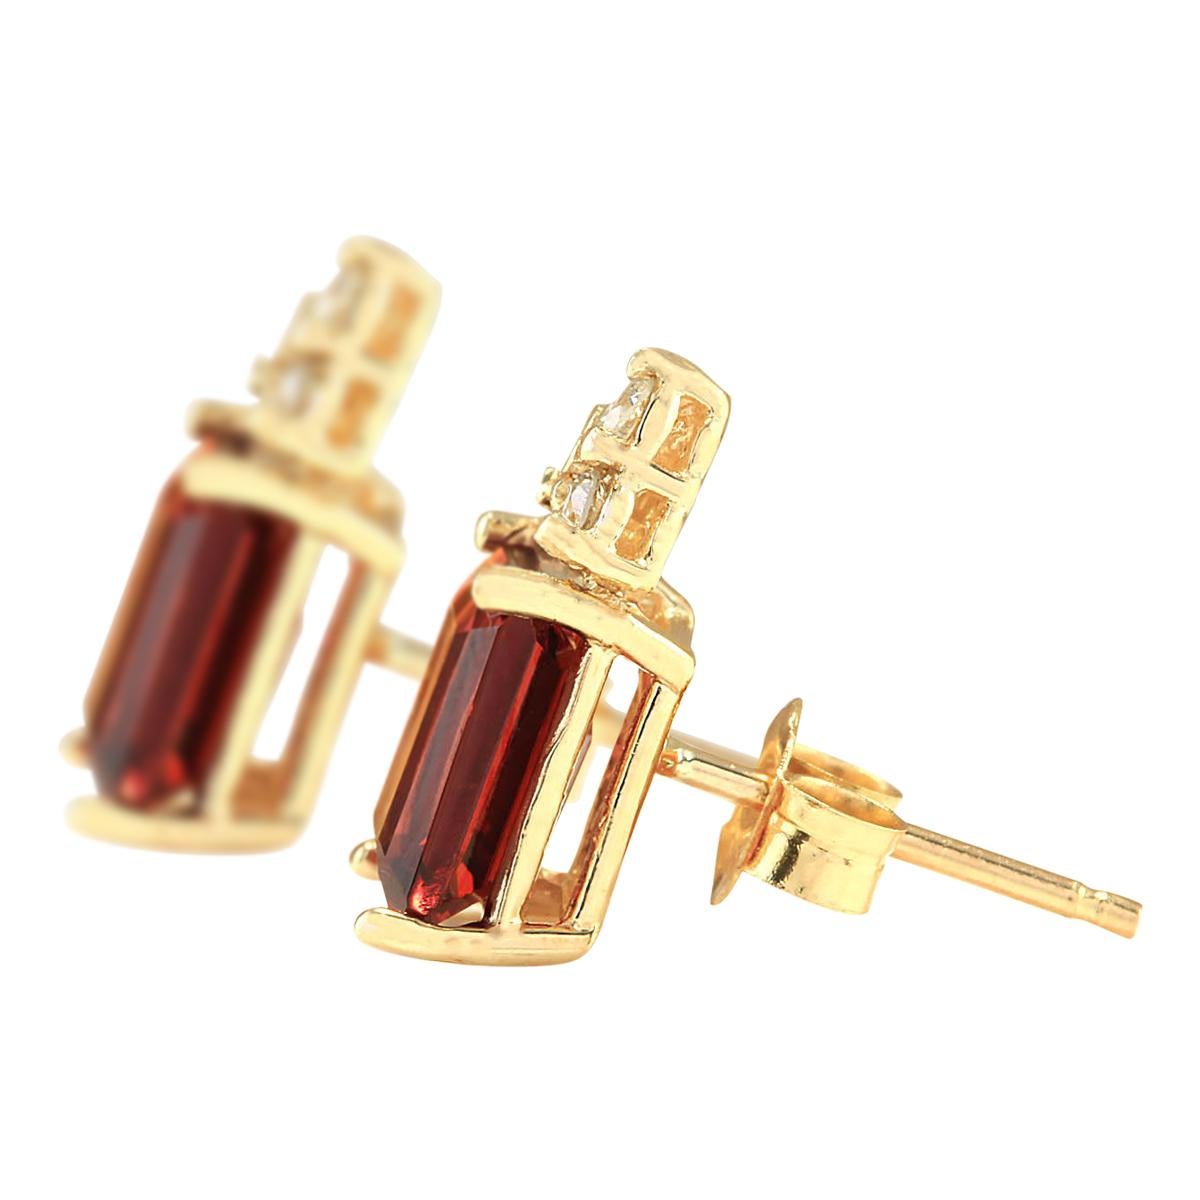 Introducing our stunning 2.65 Carat Natural Garnet Earrings, a captivating addition to your jewelry collection. Crafted in luxurious 14K Yellow Gold and stamped for authenticity, these earrings exude sophistication and charm. These earrings feature